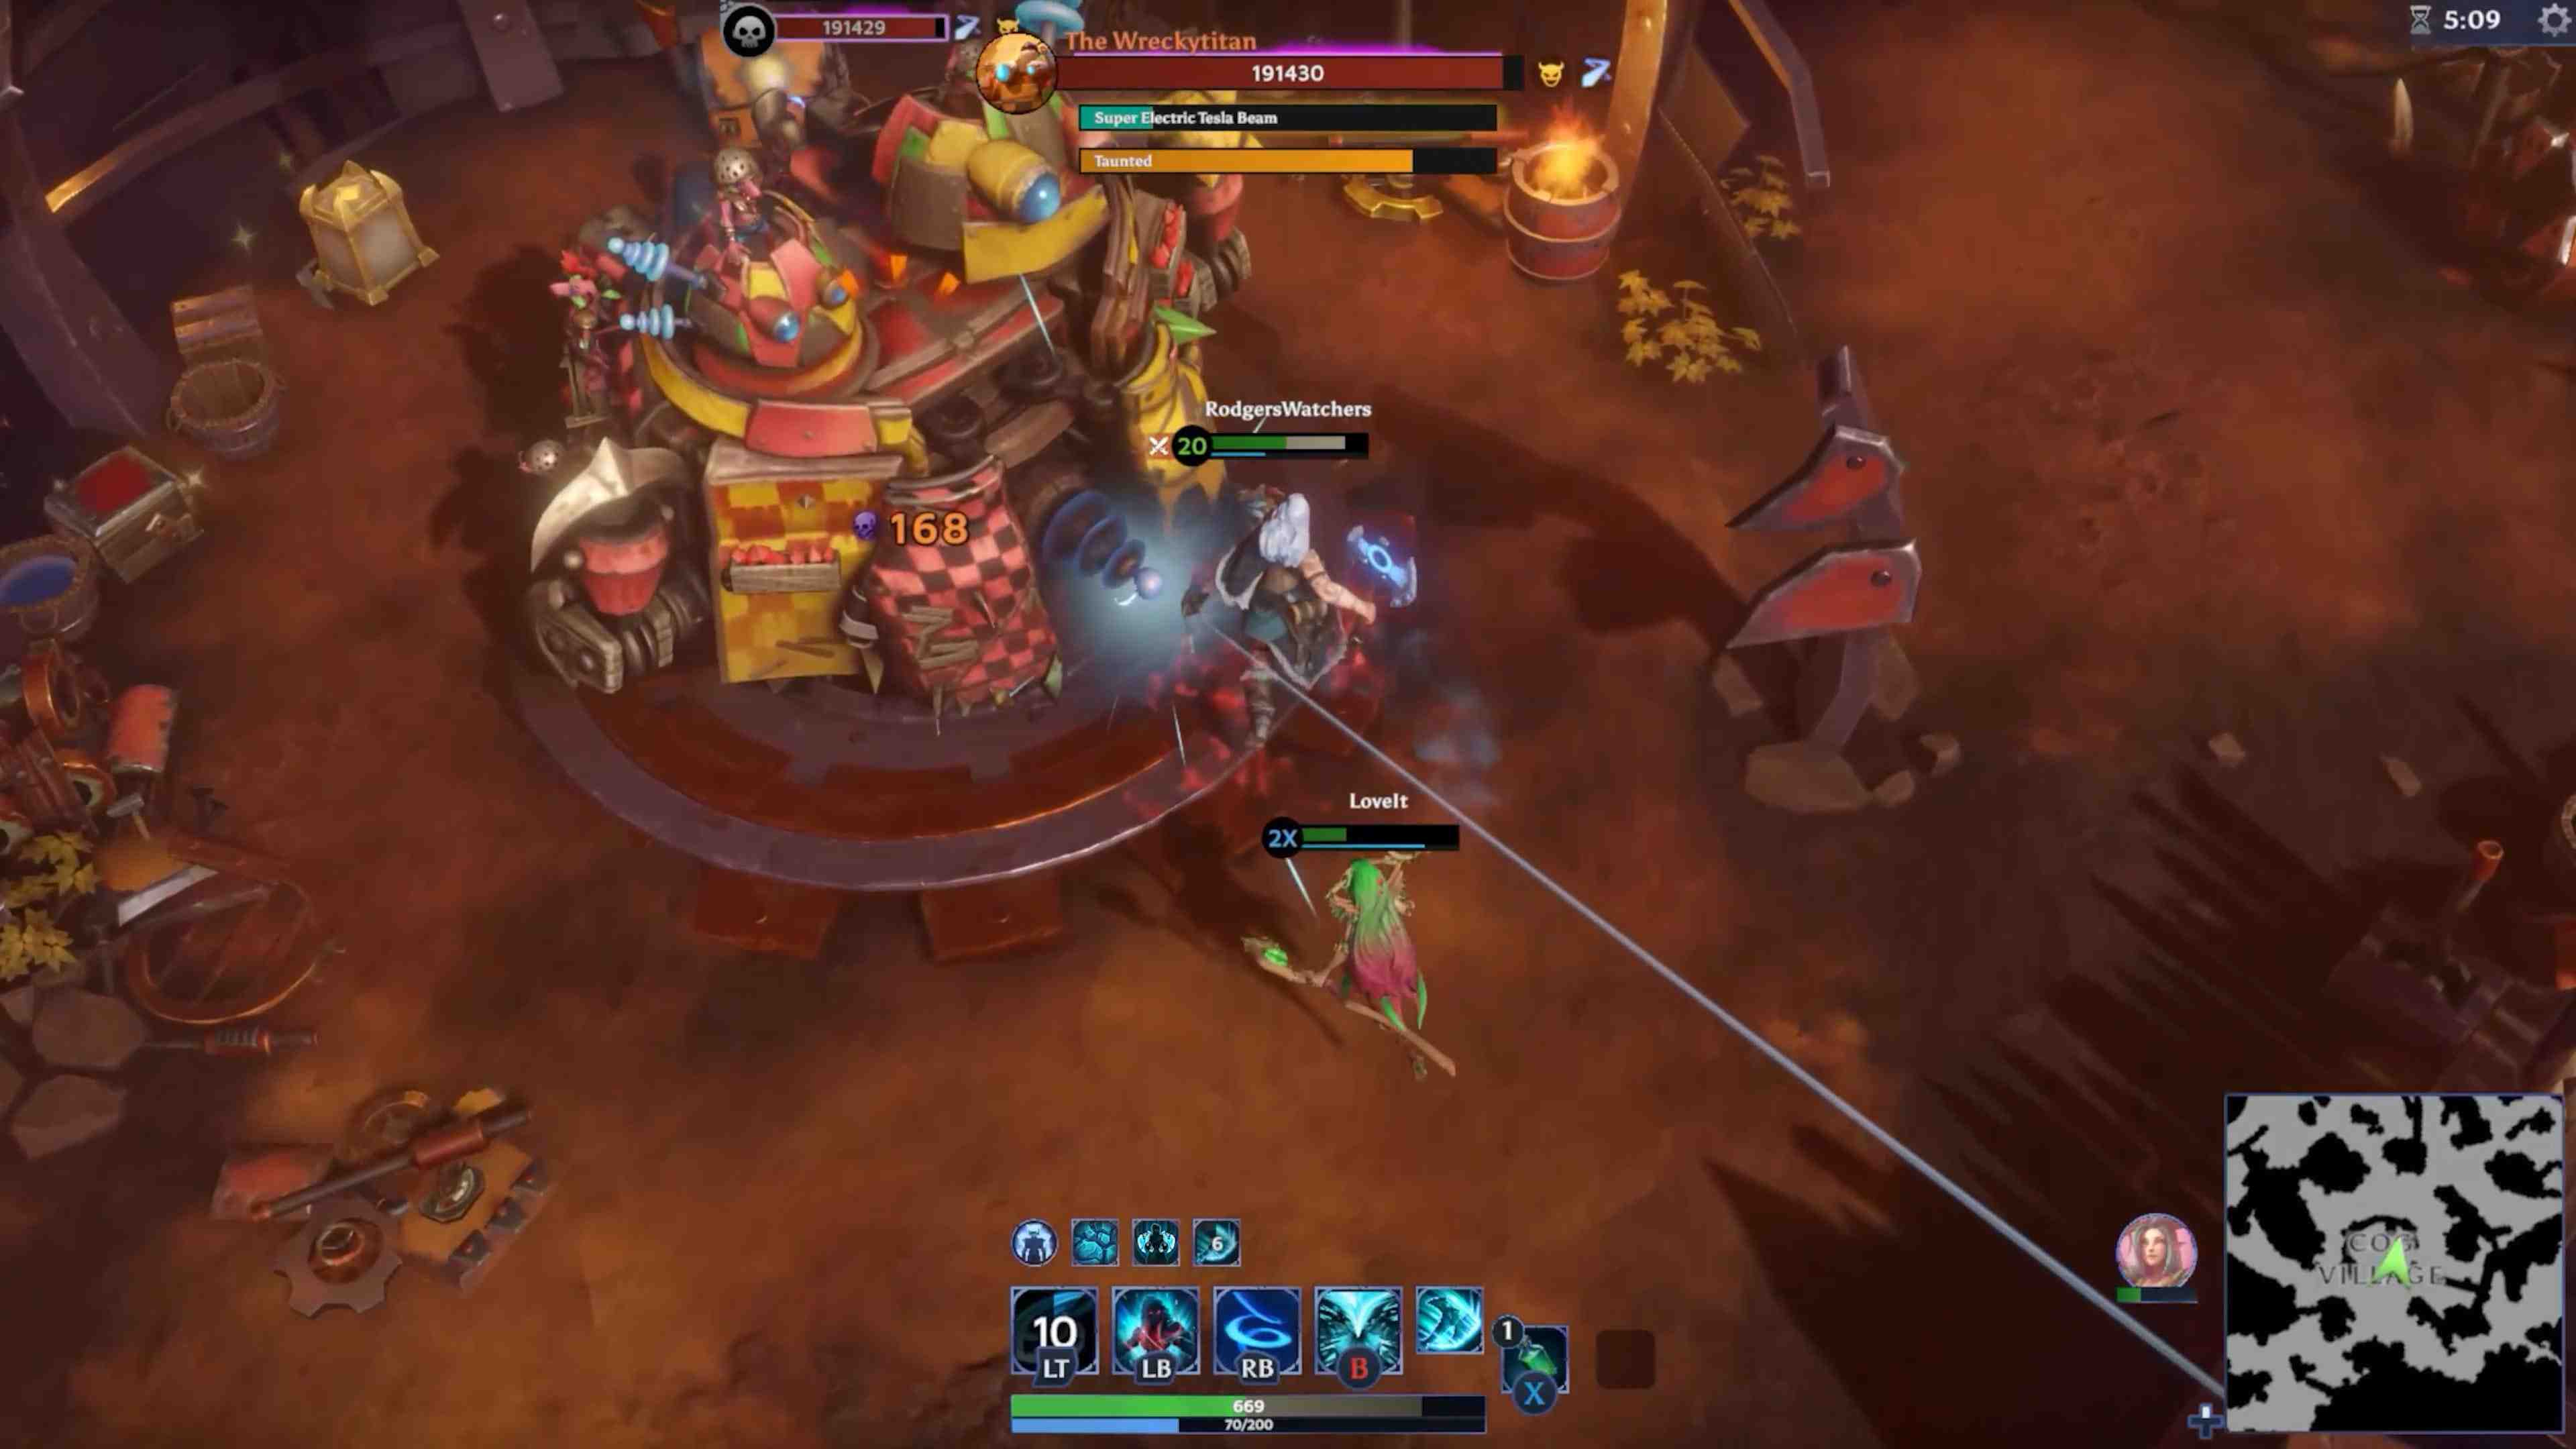 In game screenshot of a team attacking a boss.